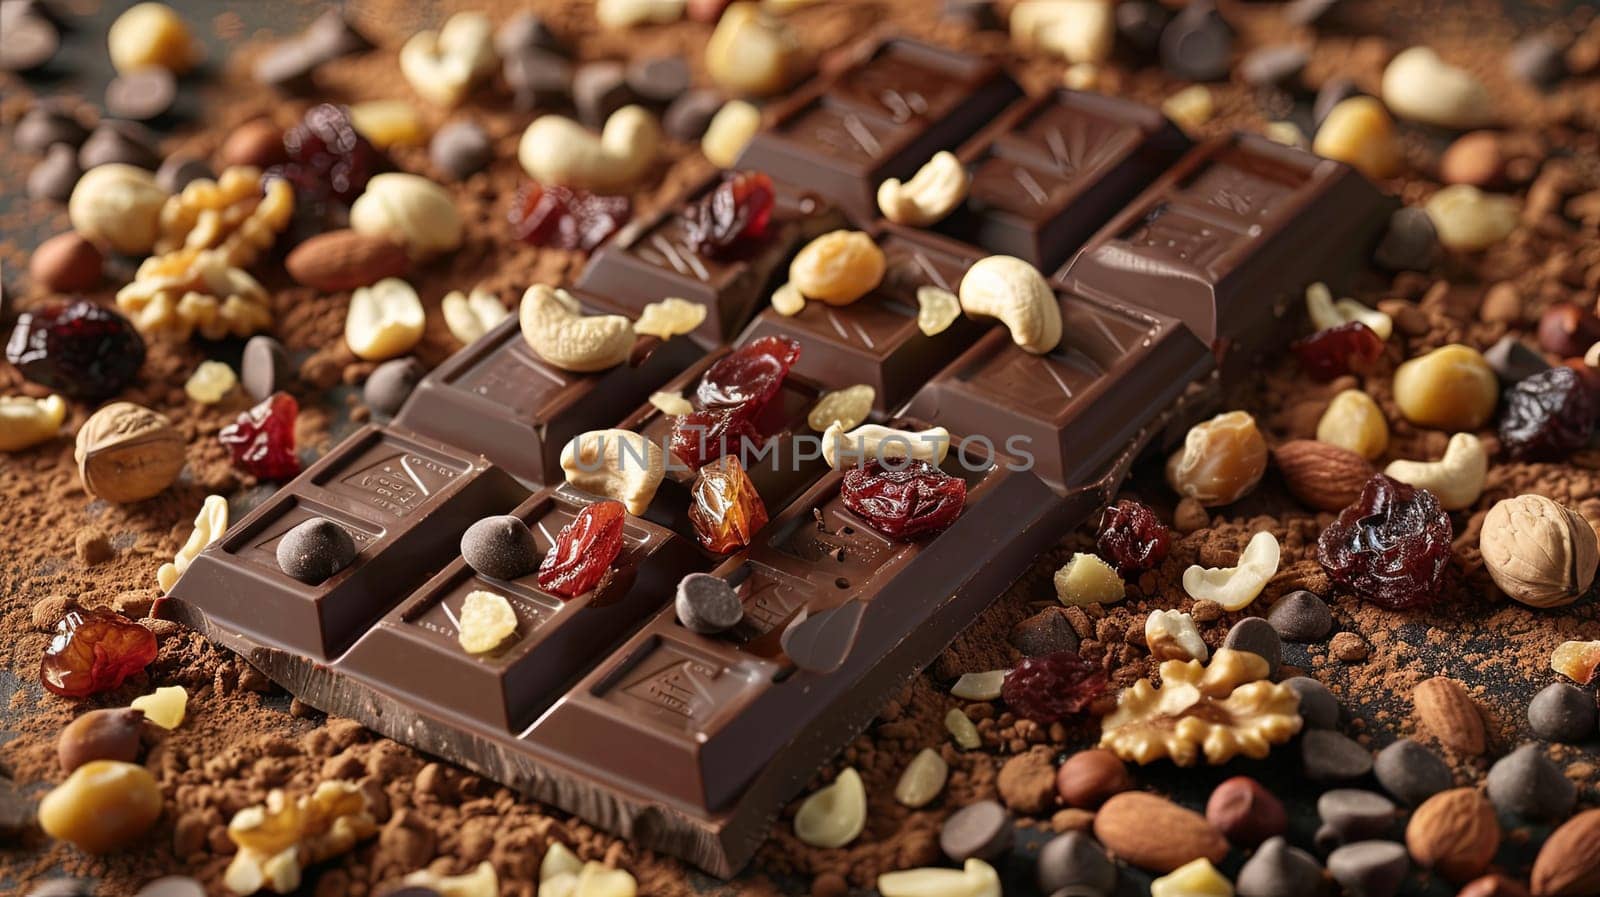 A detailed close-up of a chocolate bar filled with crunchy nuts and tart cranberries, creating a rich and appetizing treat.